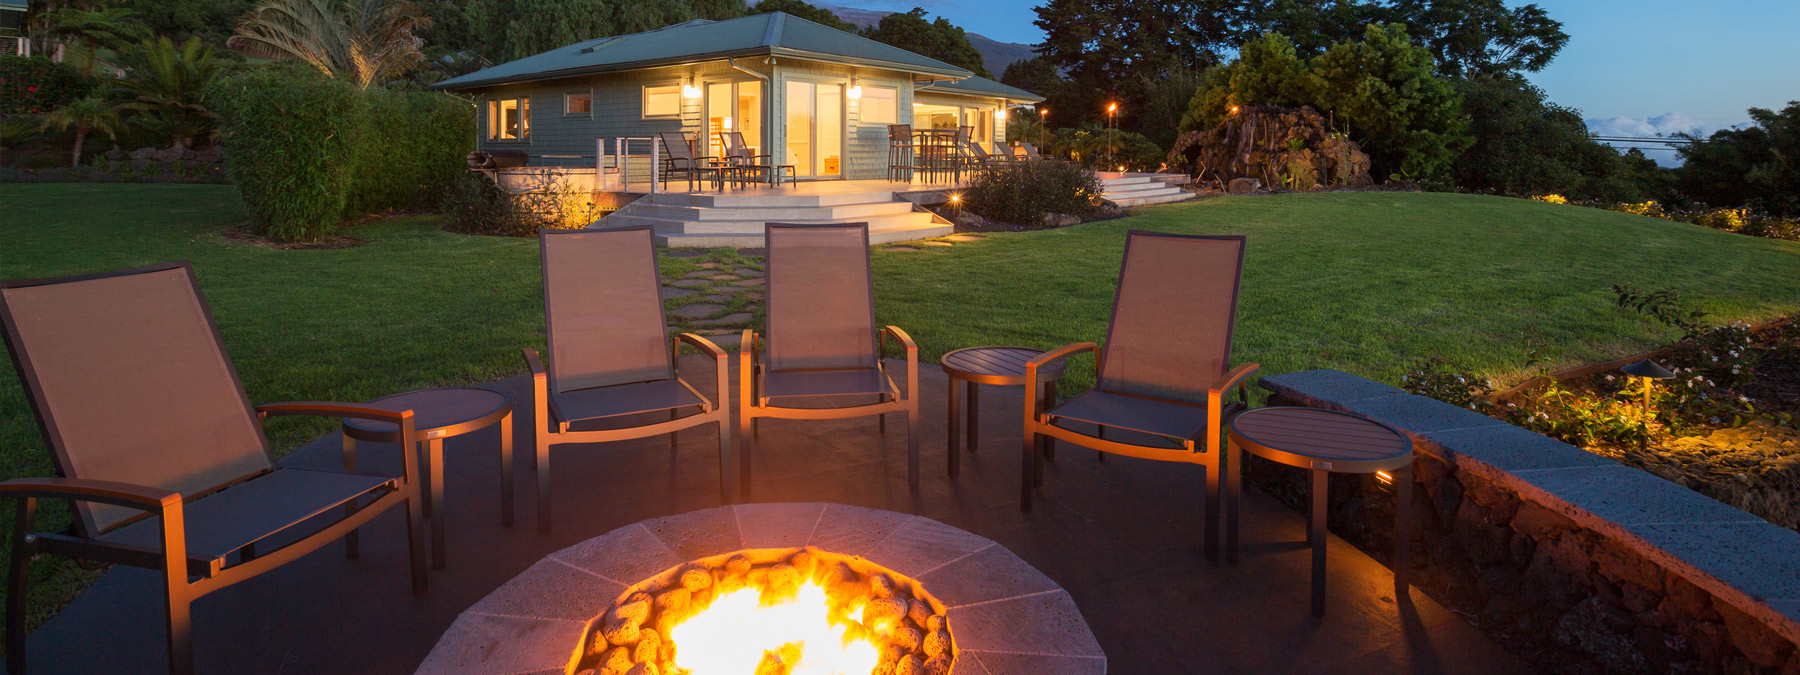 A fire pit with chairs around it in the evening.